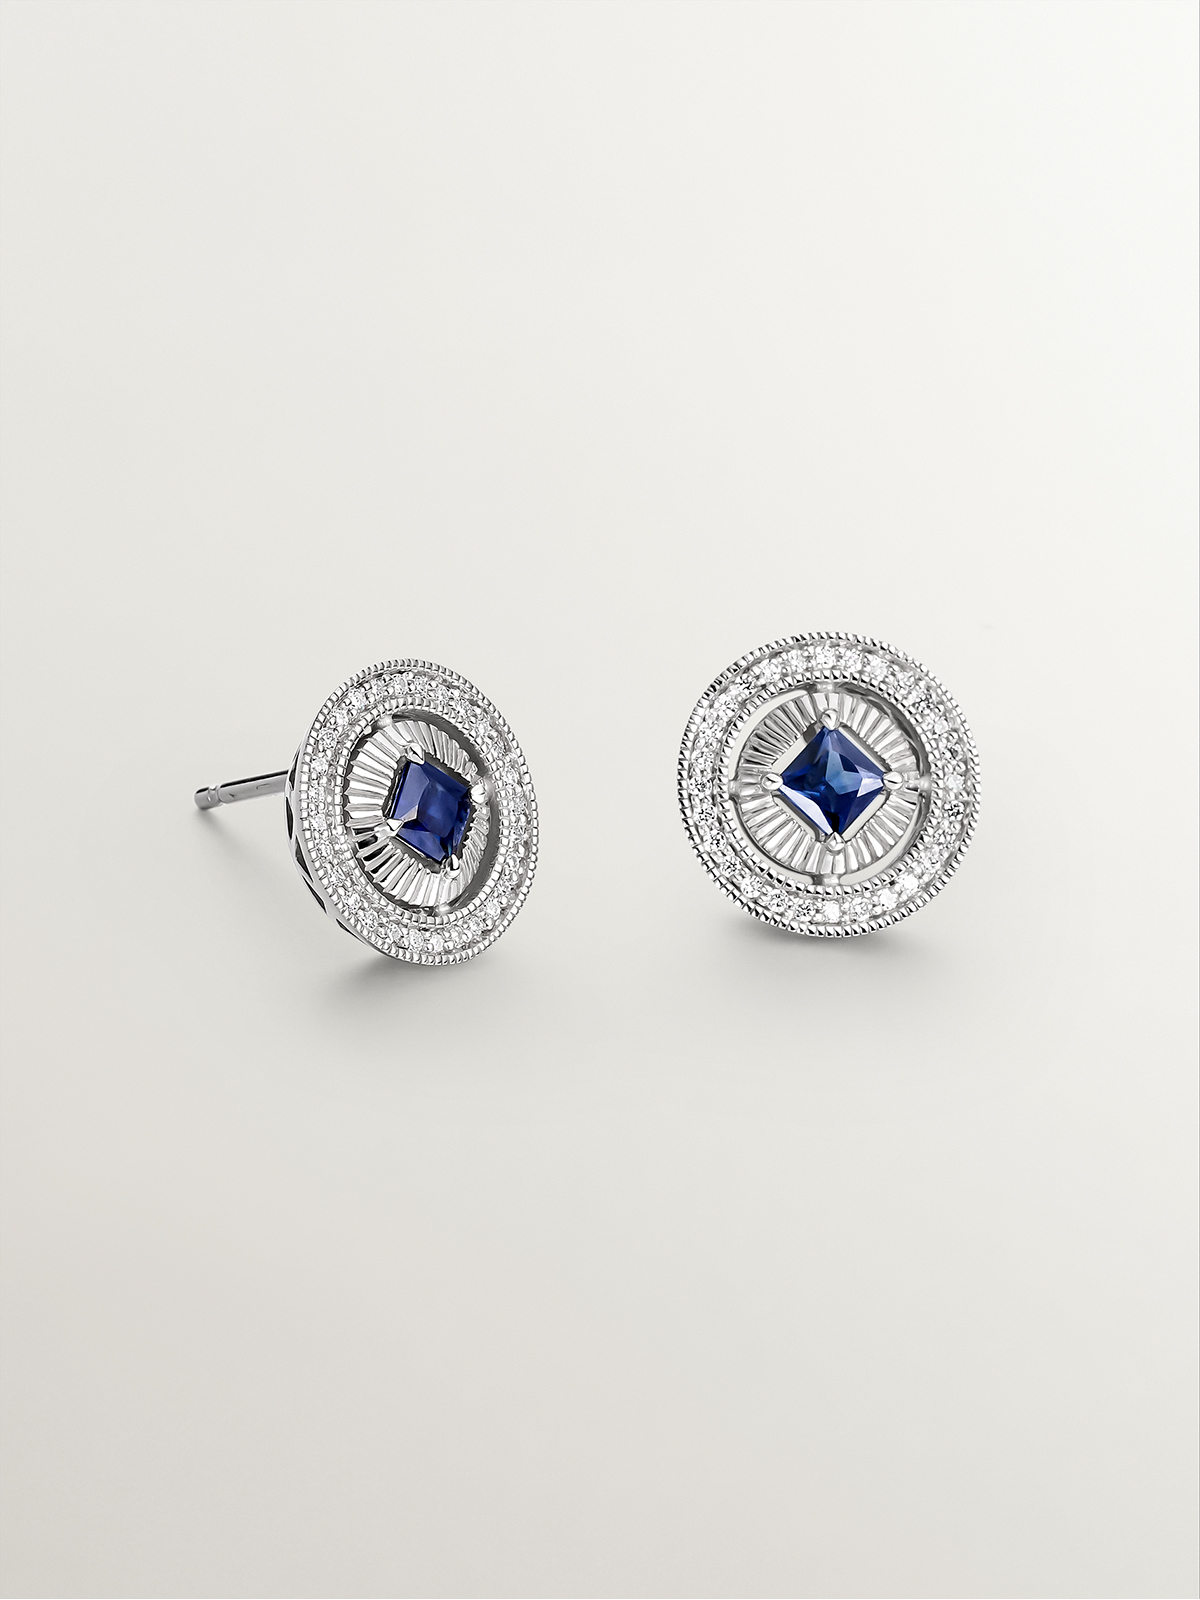 18K white gold earrings with brilliant-cut diamonds and princess-cut blue sapphires